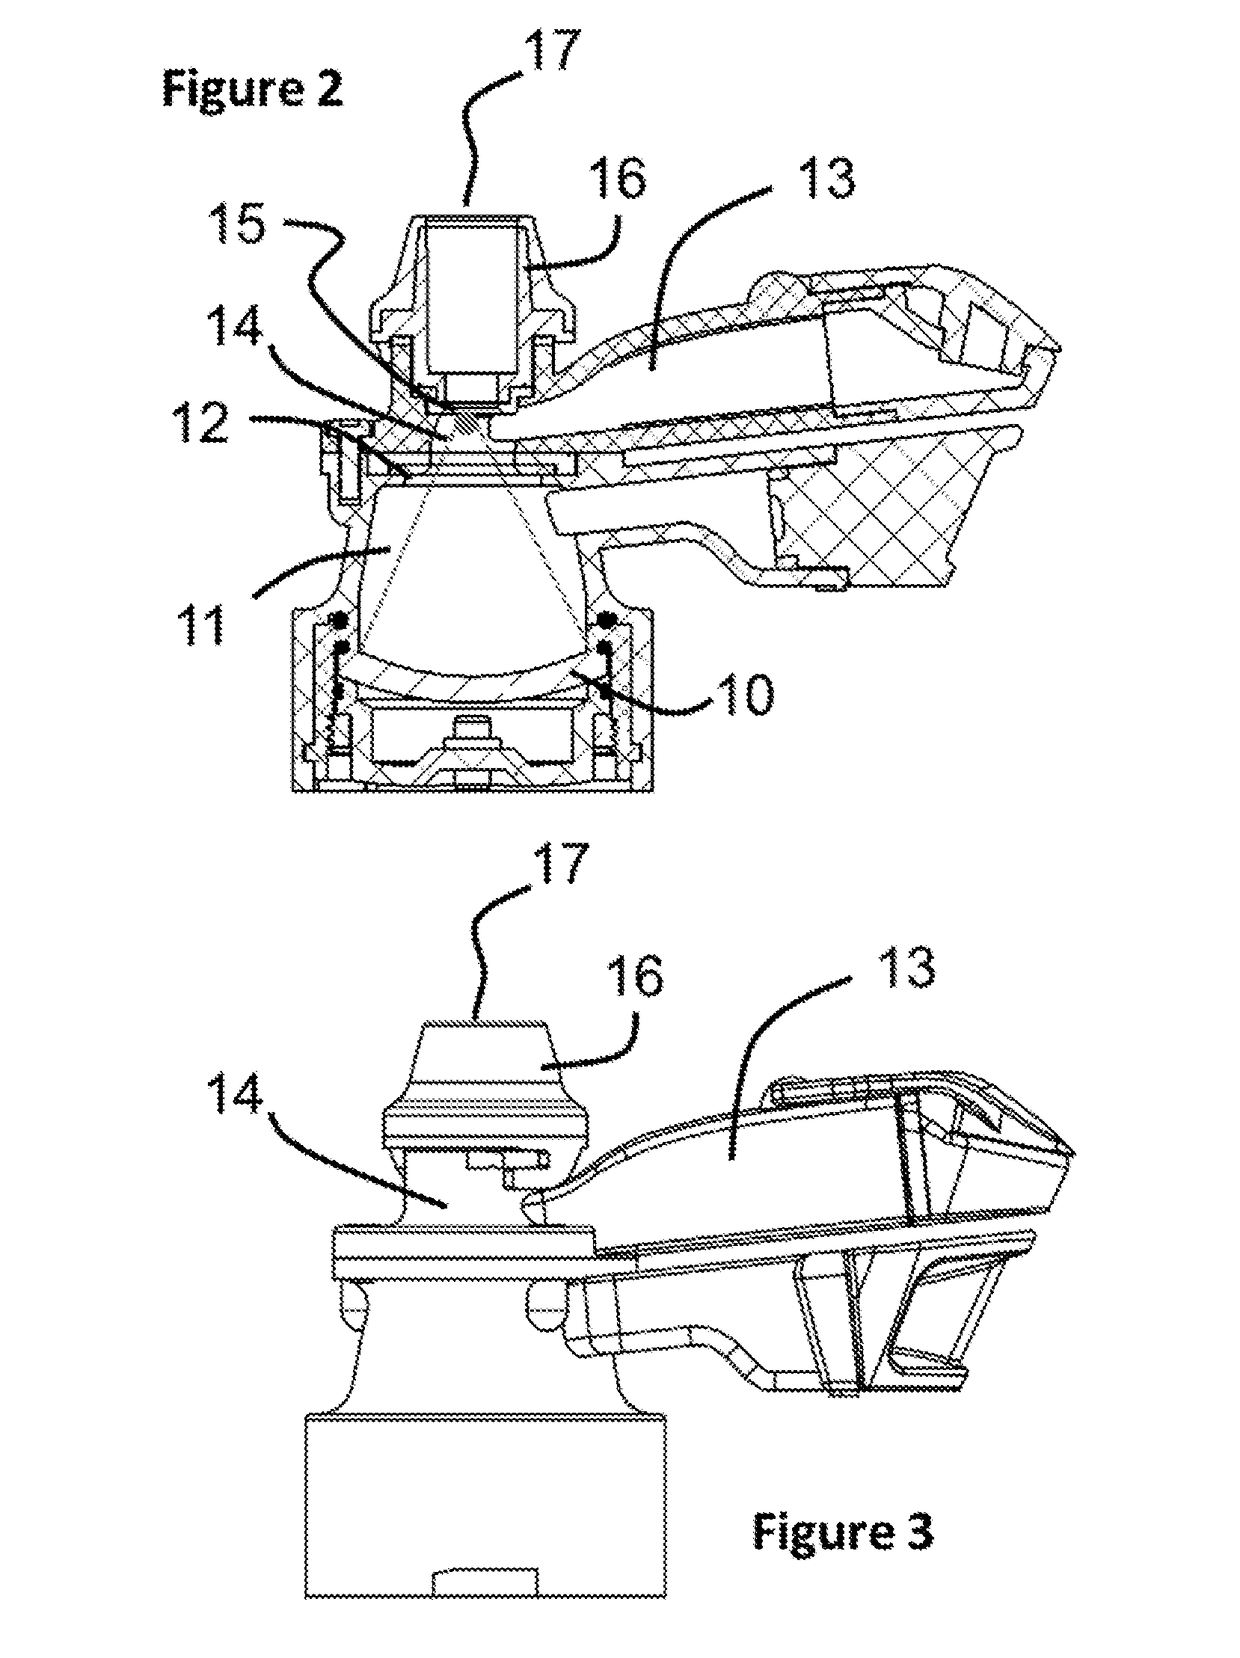 Nasal Medication Delivery Device